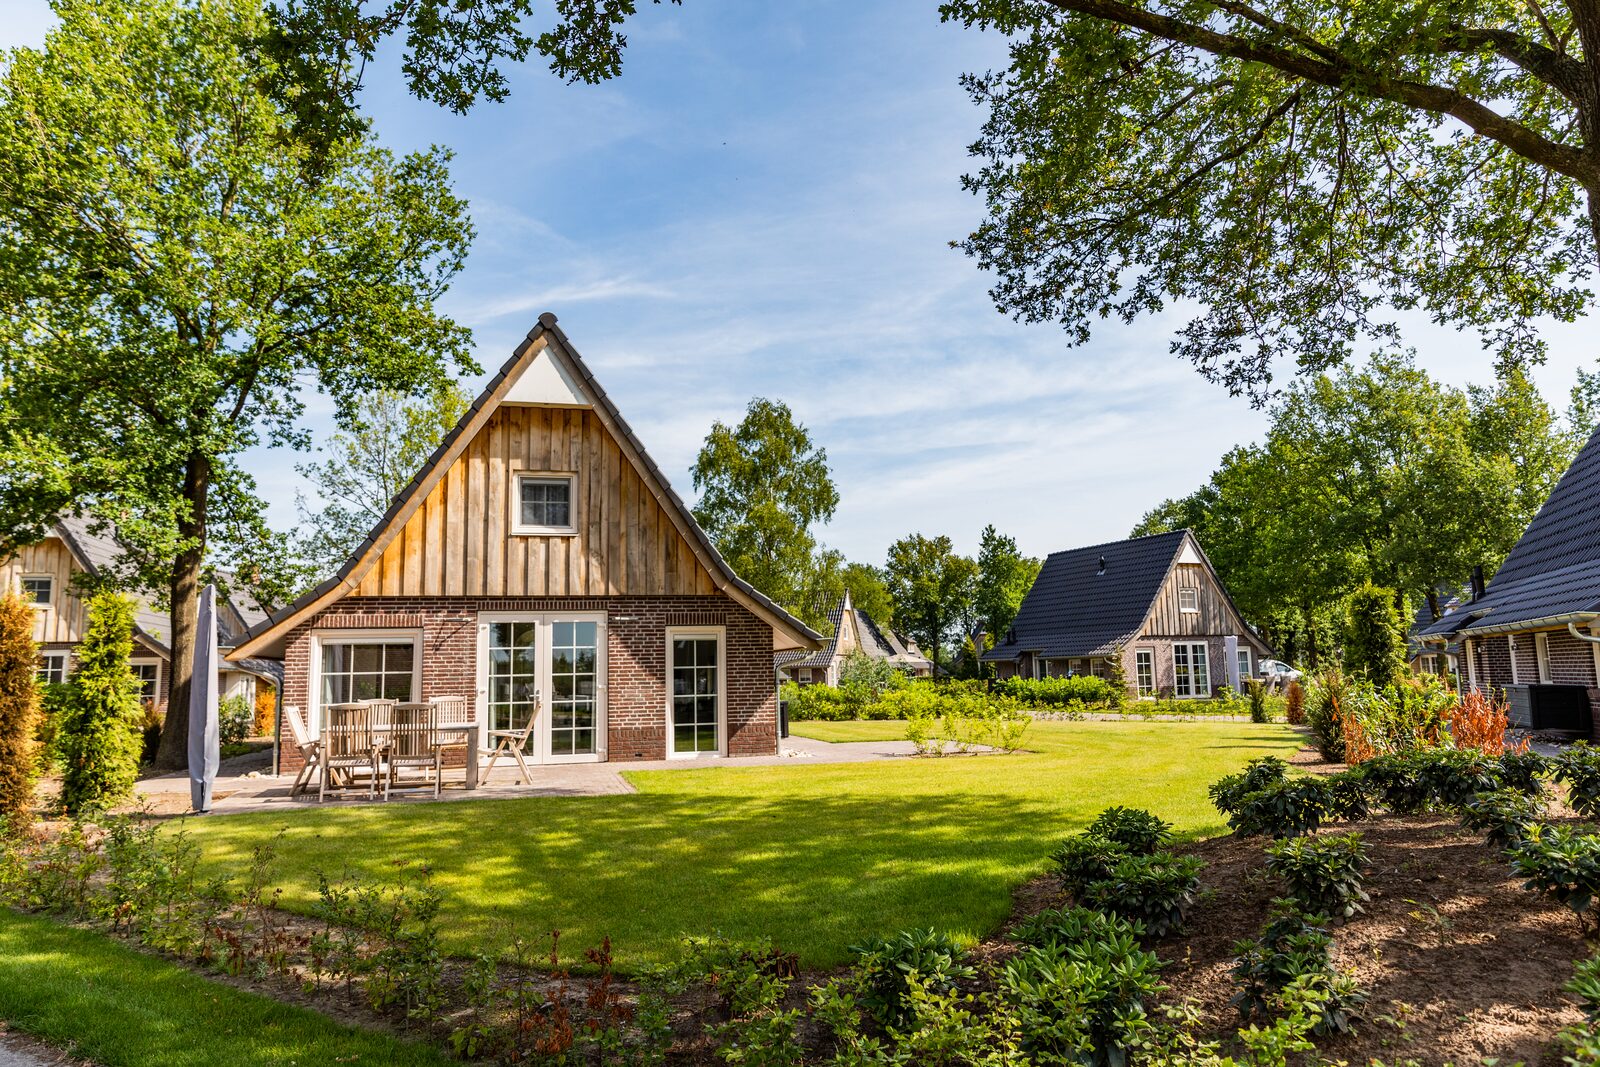 Buying a vacation home in Overijssel